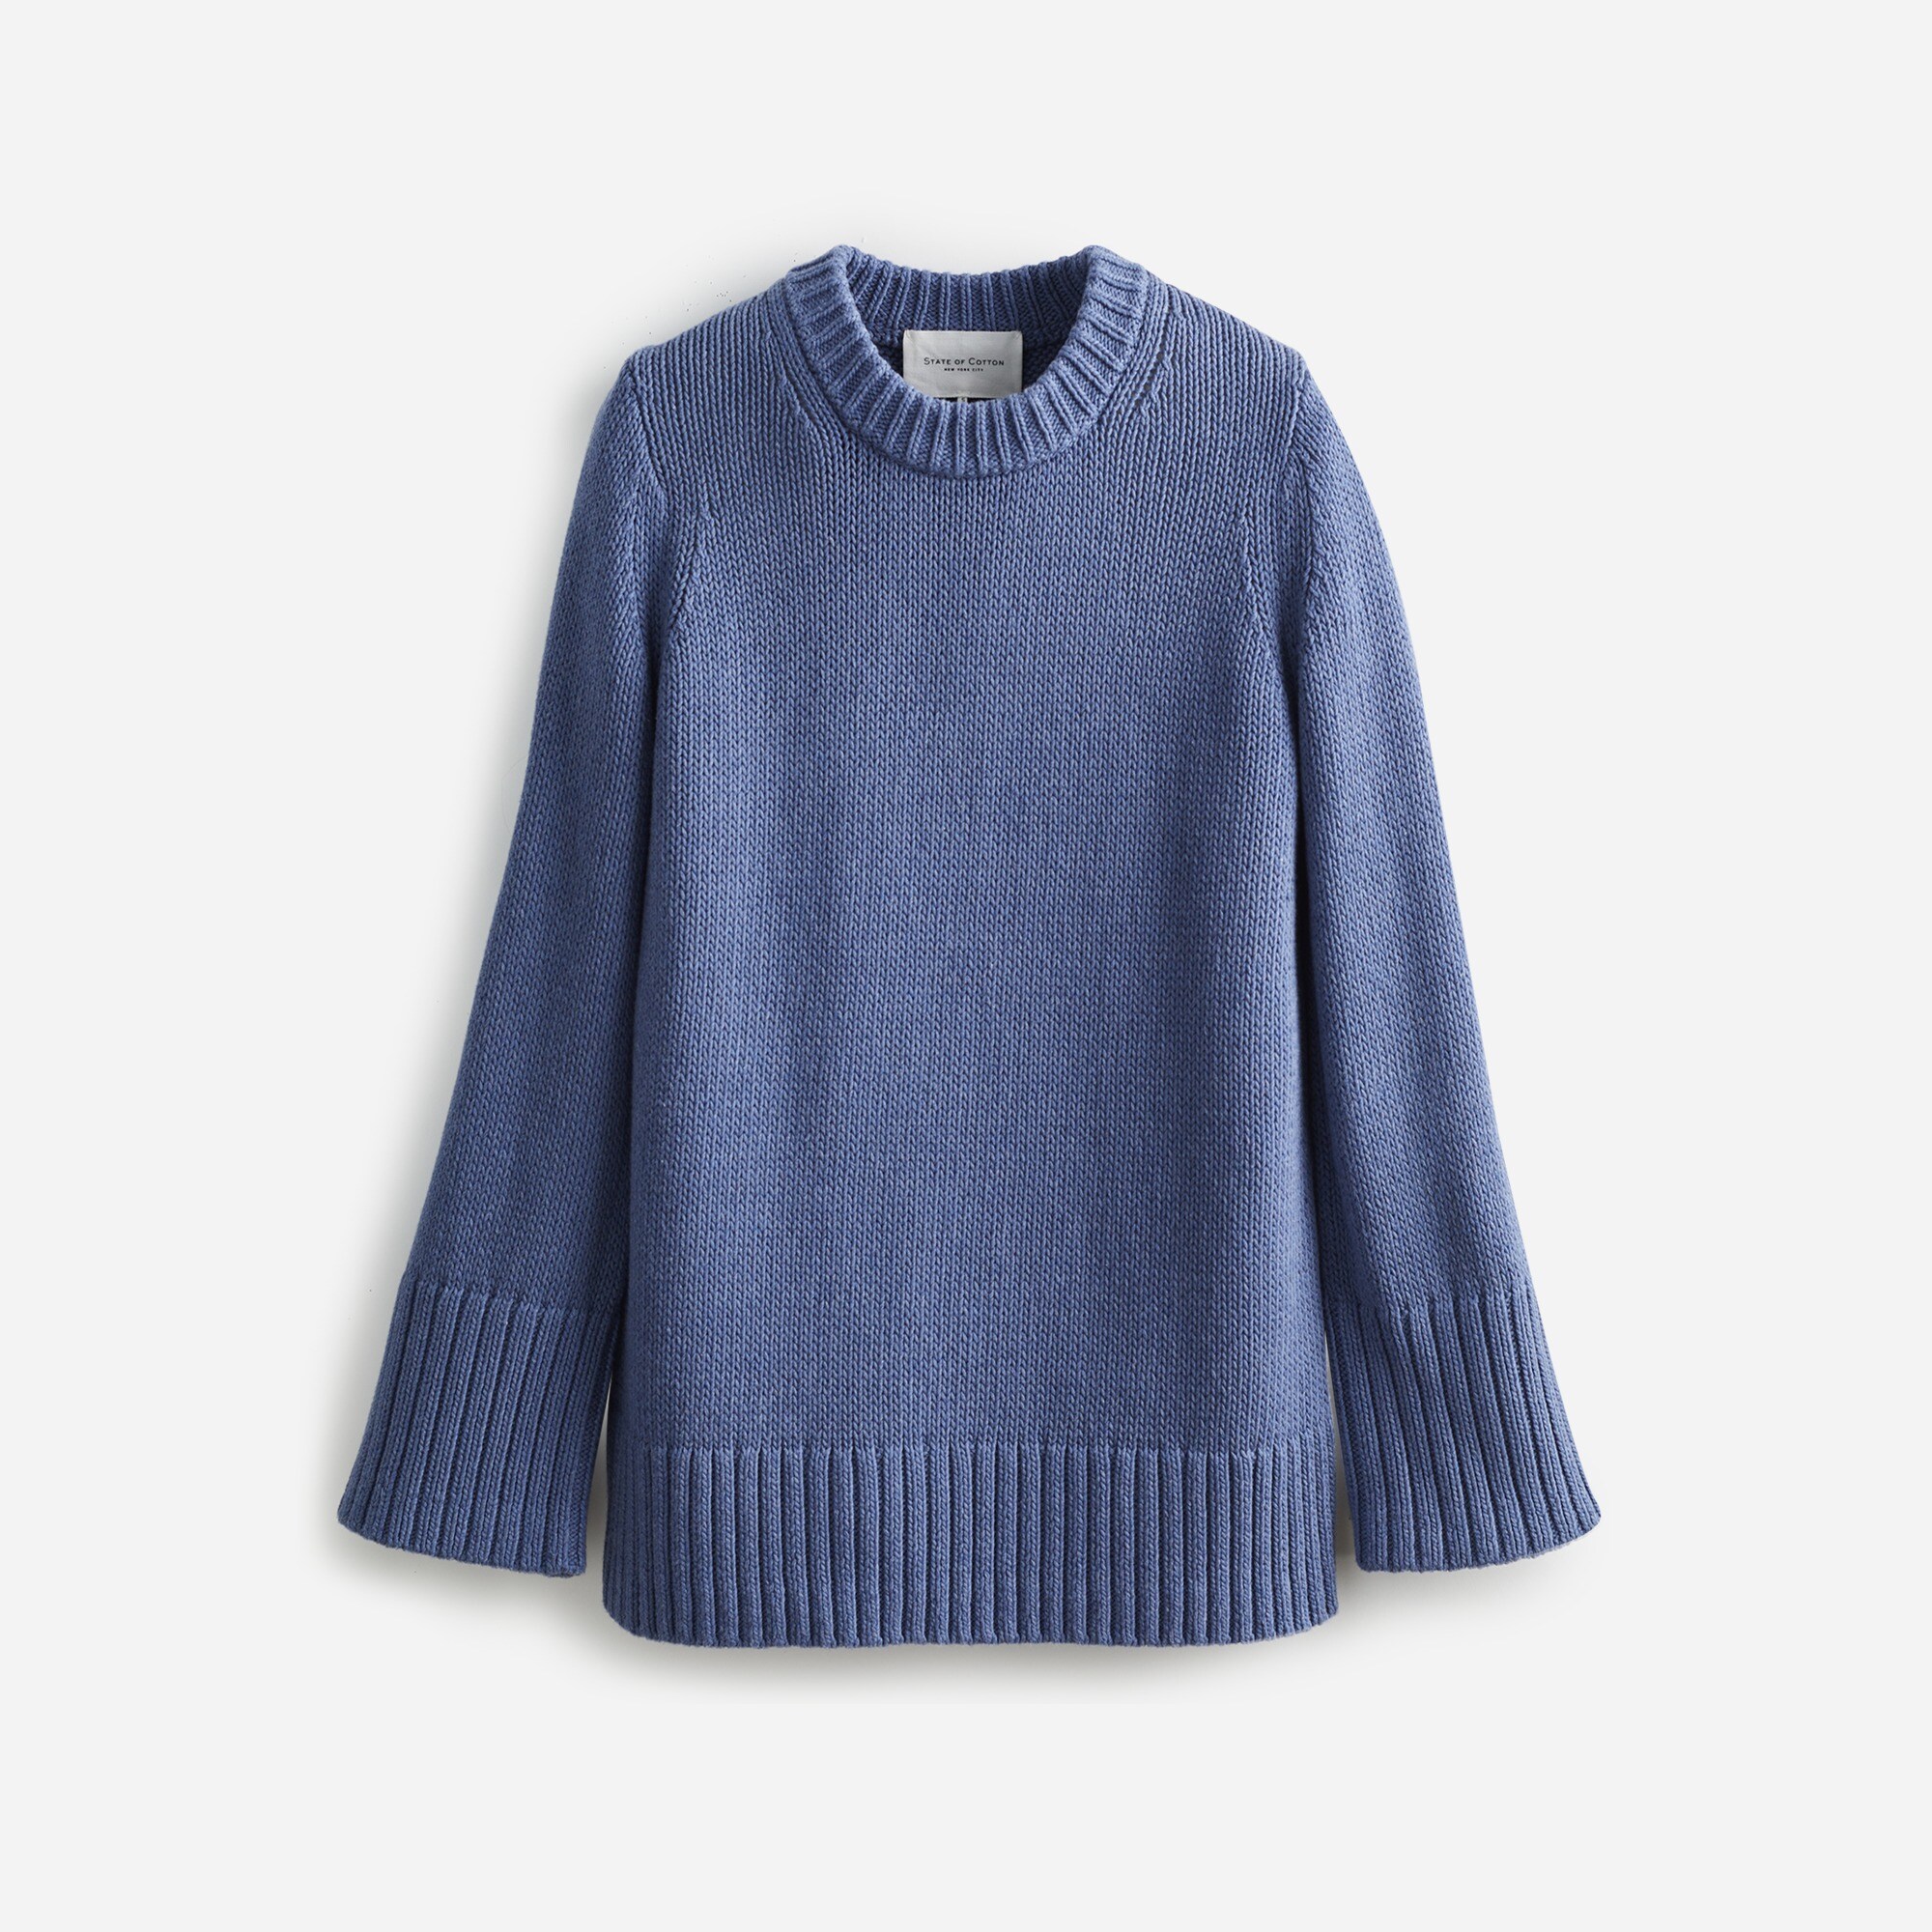  State of Cotton NYC Kittery sweater